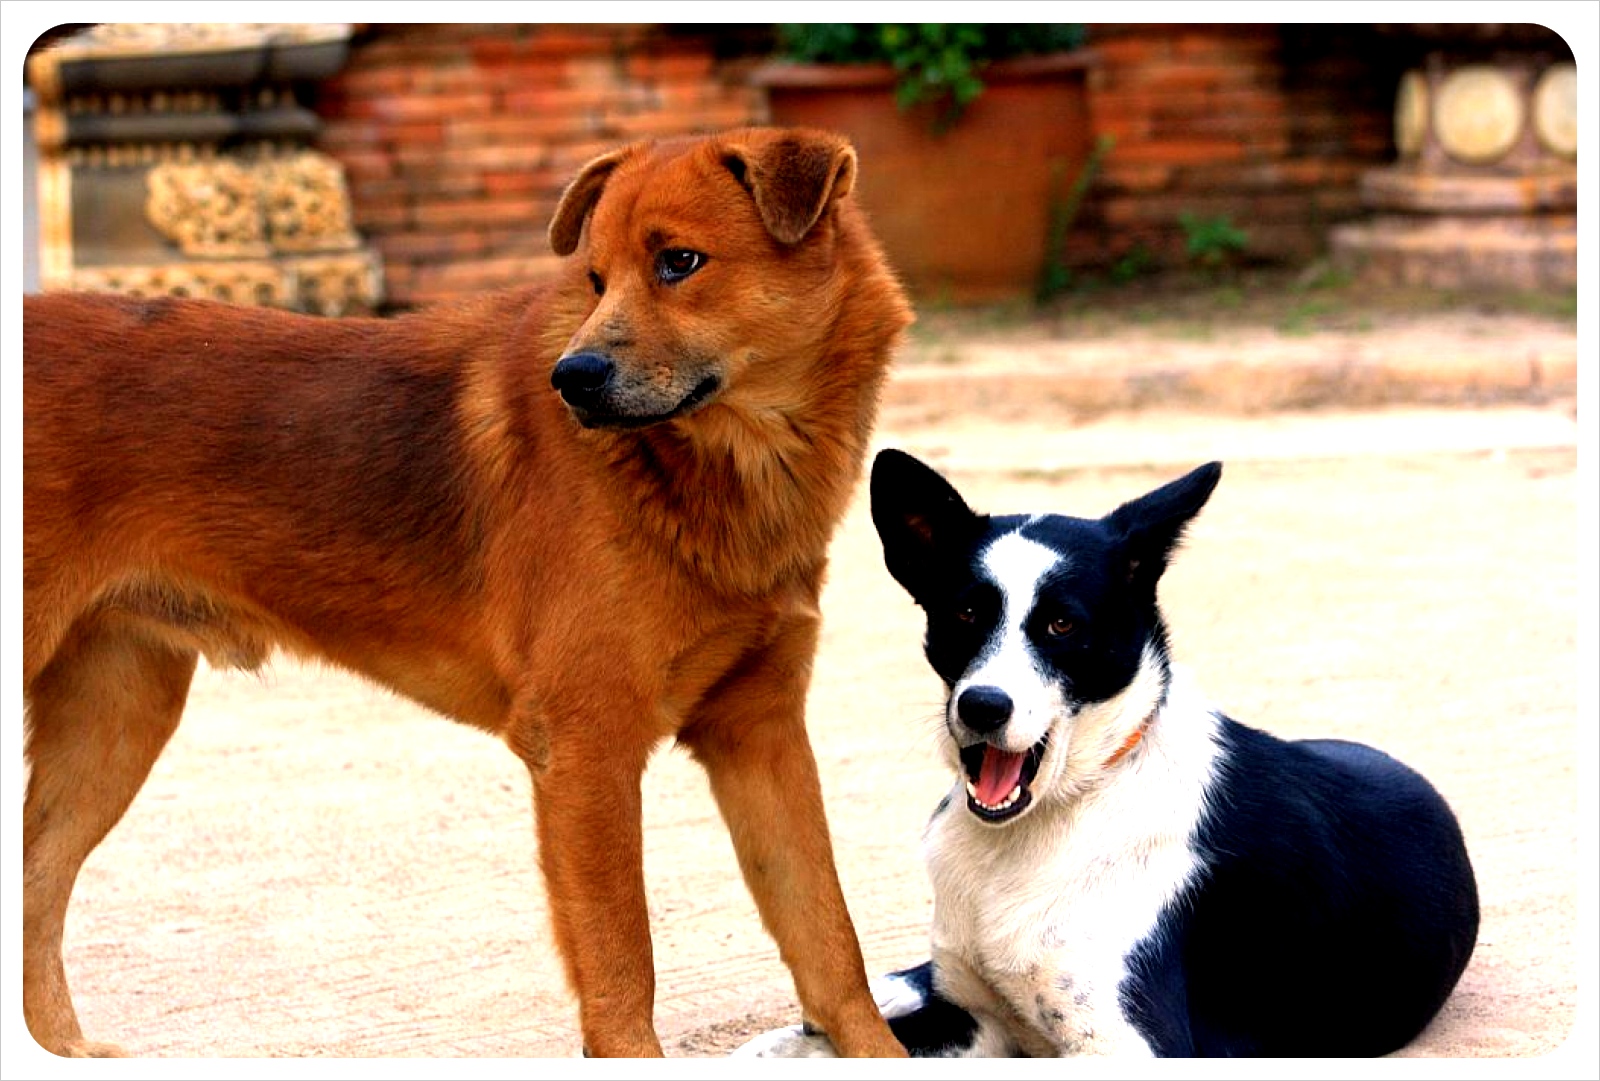 street dogs in chiang mai thailand